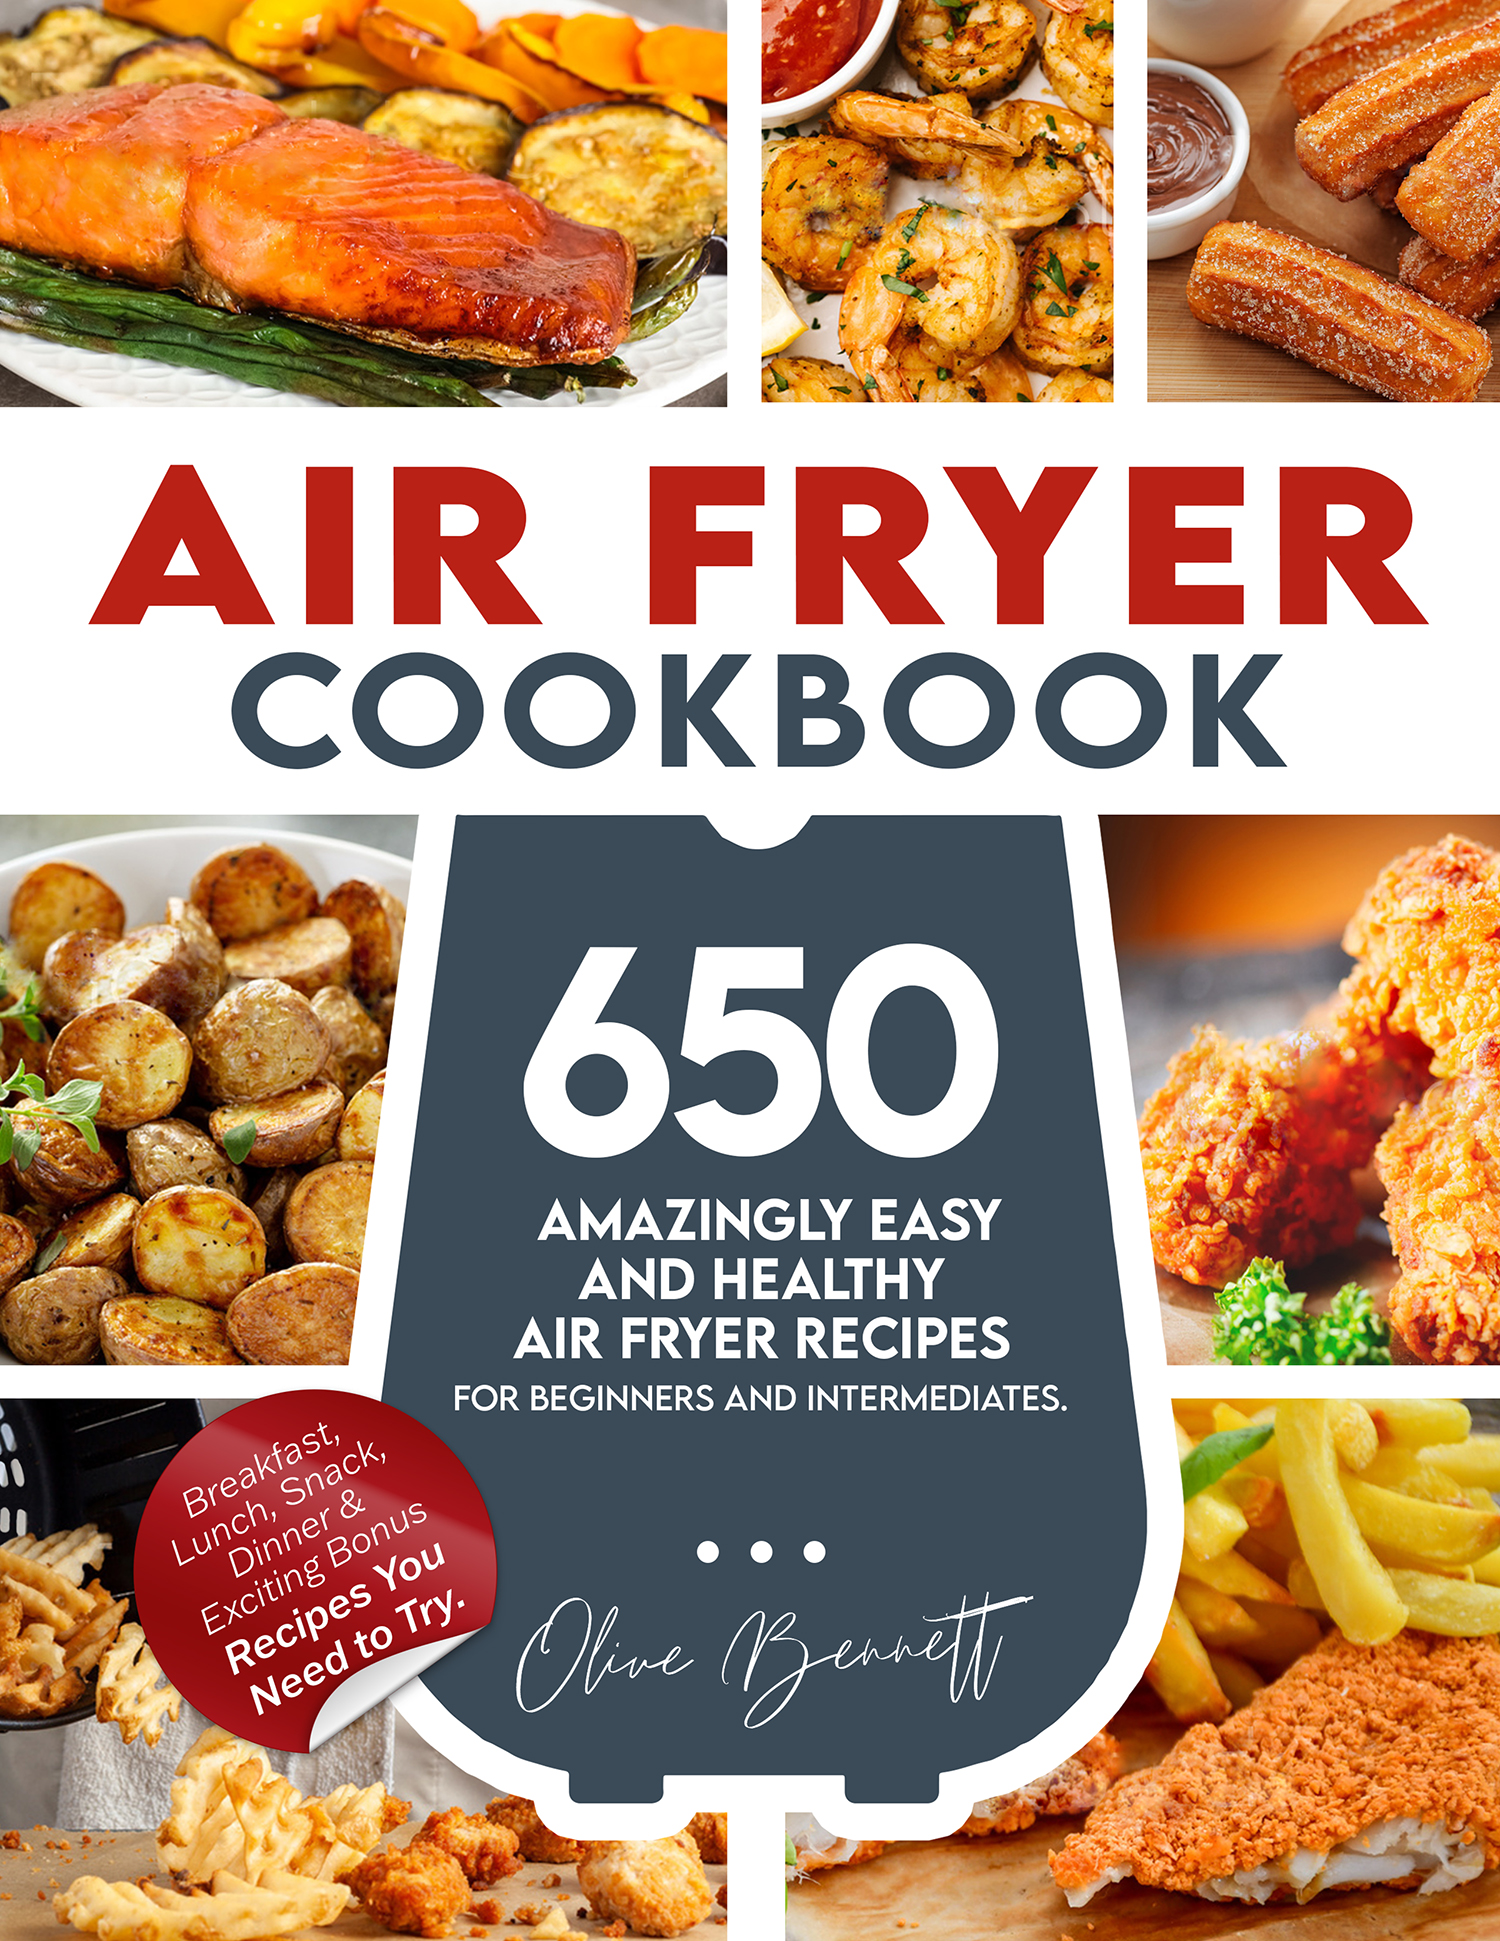 FREE: Air Fryer Cookbook: 650 Amazingly Easy and Healthy Air Fryer Recipes for Beginners and Intermediates. Breakfast, Lunch, Snack, Dinner & Exciting Bonus Recipes You Need to Try. by Olive Bennett